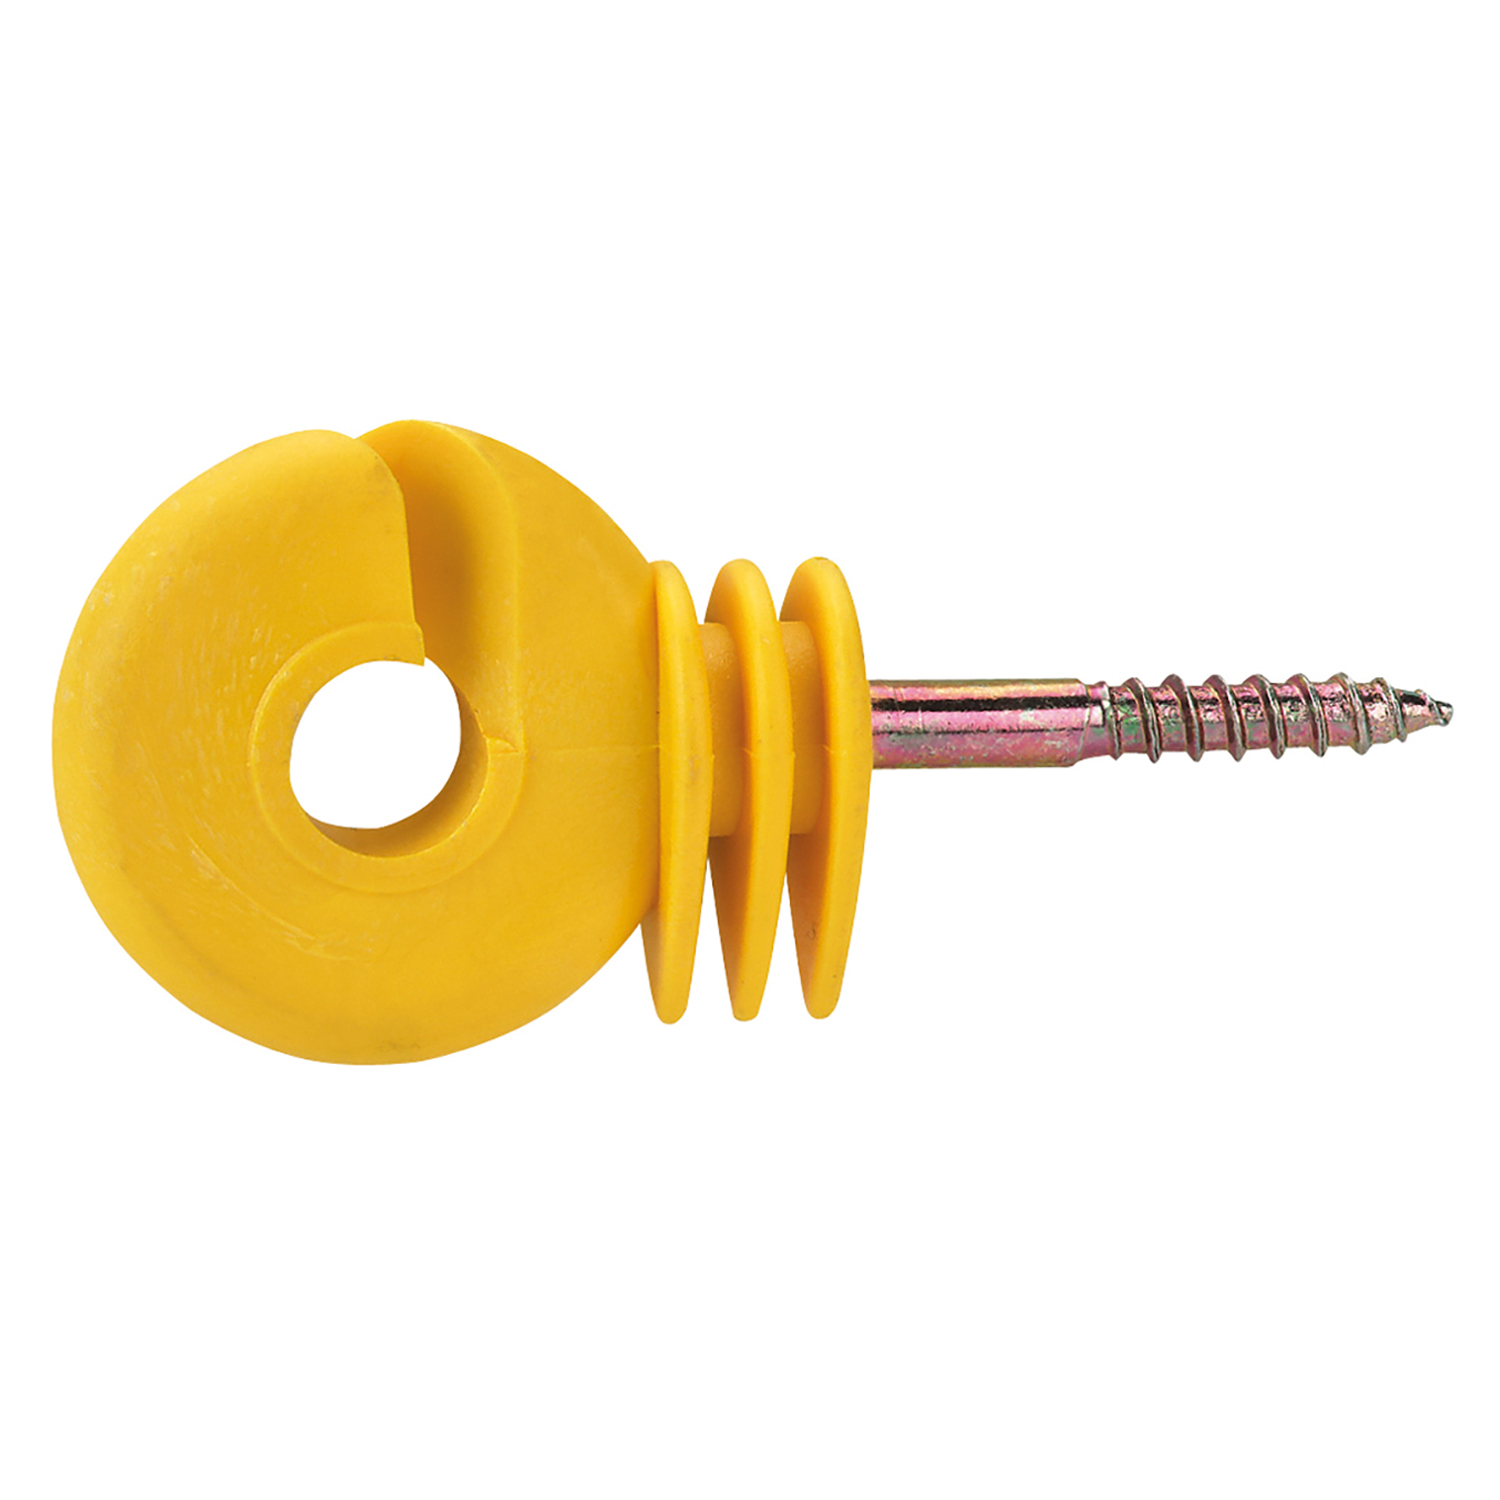 CORRAL RING INSULATOR COMPACT YELLOW X 25 PACK 25 PACK